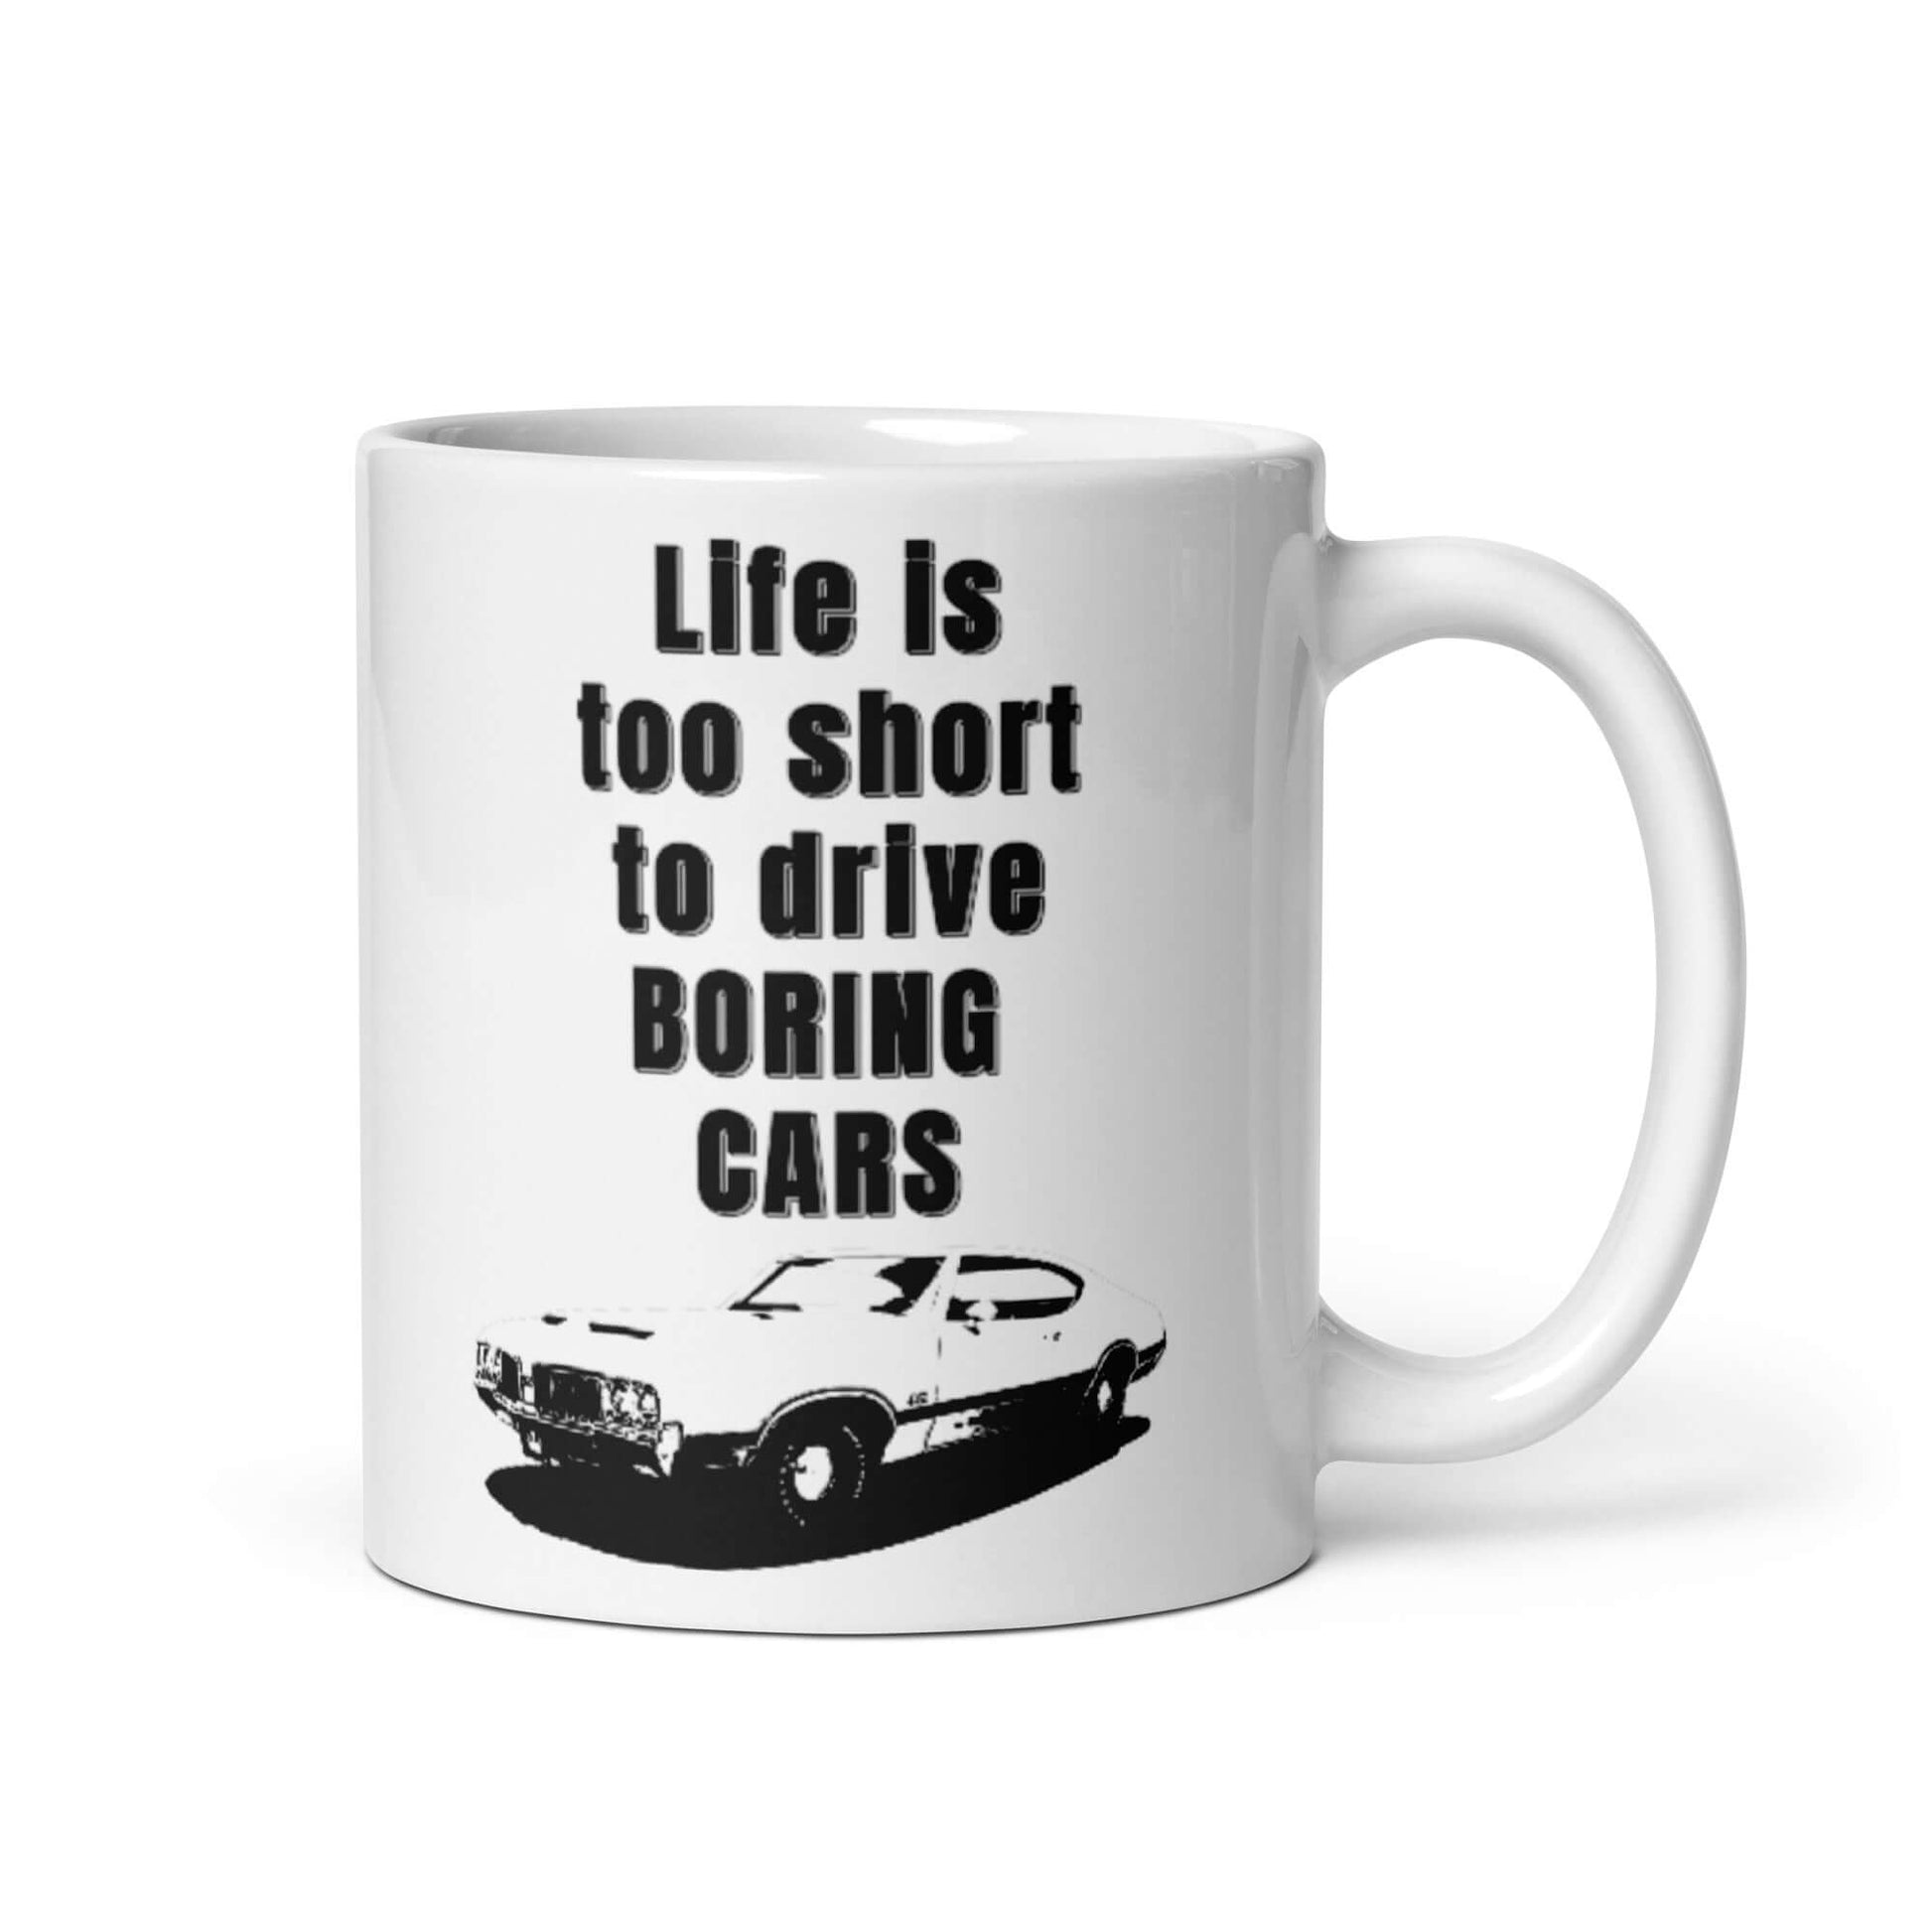 Life is too short to be driving boring cars - 1970 Oldsmobile 442 - White glossy mug 1970 olds 1970 oldsmobile 442 Caffeine chevrolet chevy classic car Coffee Addiction Coffee Beans Coffee Break Coffee Humor Coffee is Life Coffee Lover Coffee Shop Coffee Snob Coffee Time Espresso Funny Quotes Humor Java Keep Calm and Drink Coffee Latte Mocha Morning muscle car olds 442 oldsmobile oldsmobile 442 Procaffeinating Sarcasm Wordplay